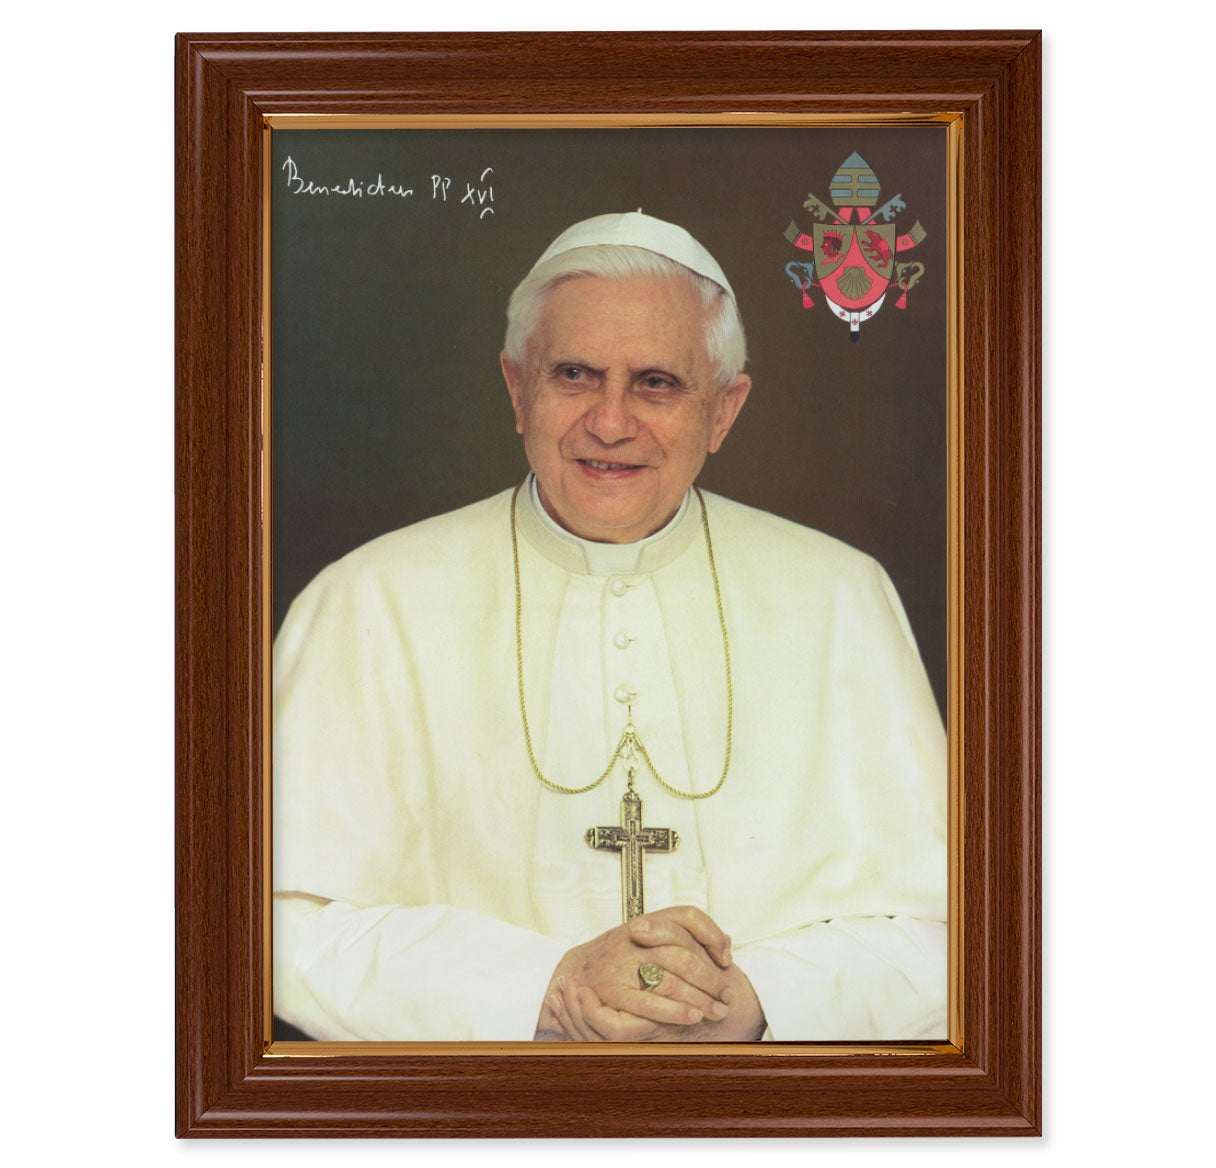 Pope Benedict XVI Picture Framed Wall Art Decor Extra Large, Traditional Dark Walnut Finished Frame with Thin Gold Lip